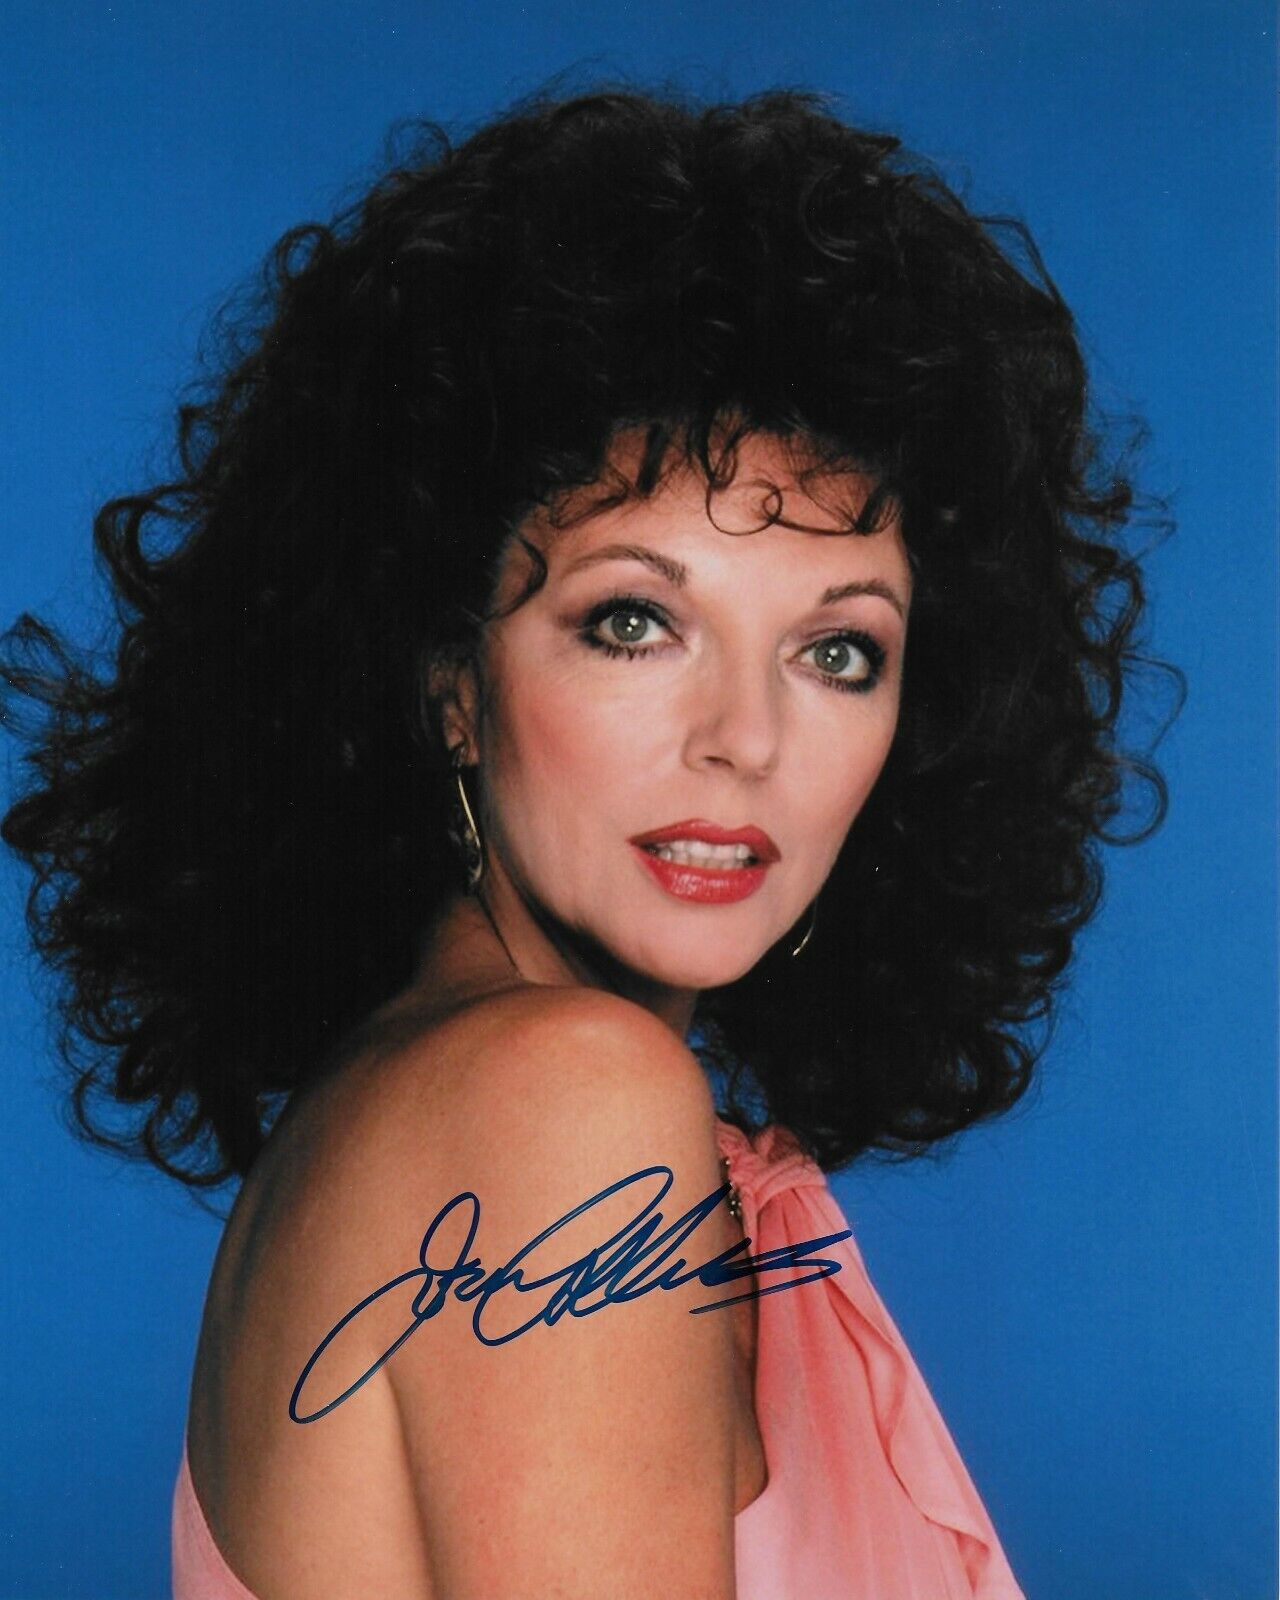 Joan Collins Original Autographed 8X10 Photo Poster painting #10 signed @Hollywood Show -Dynasty